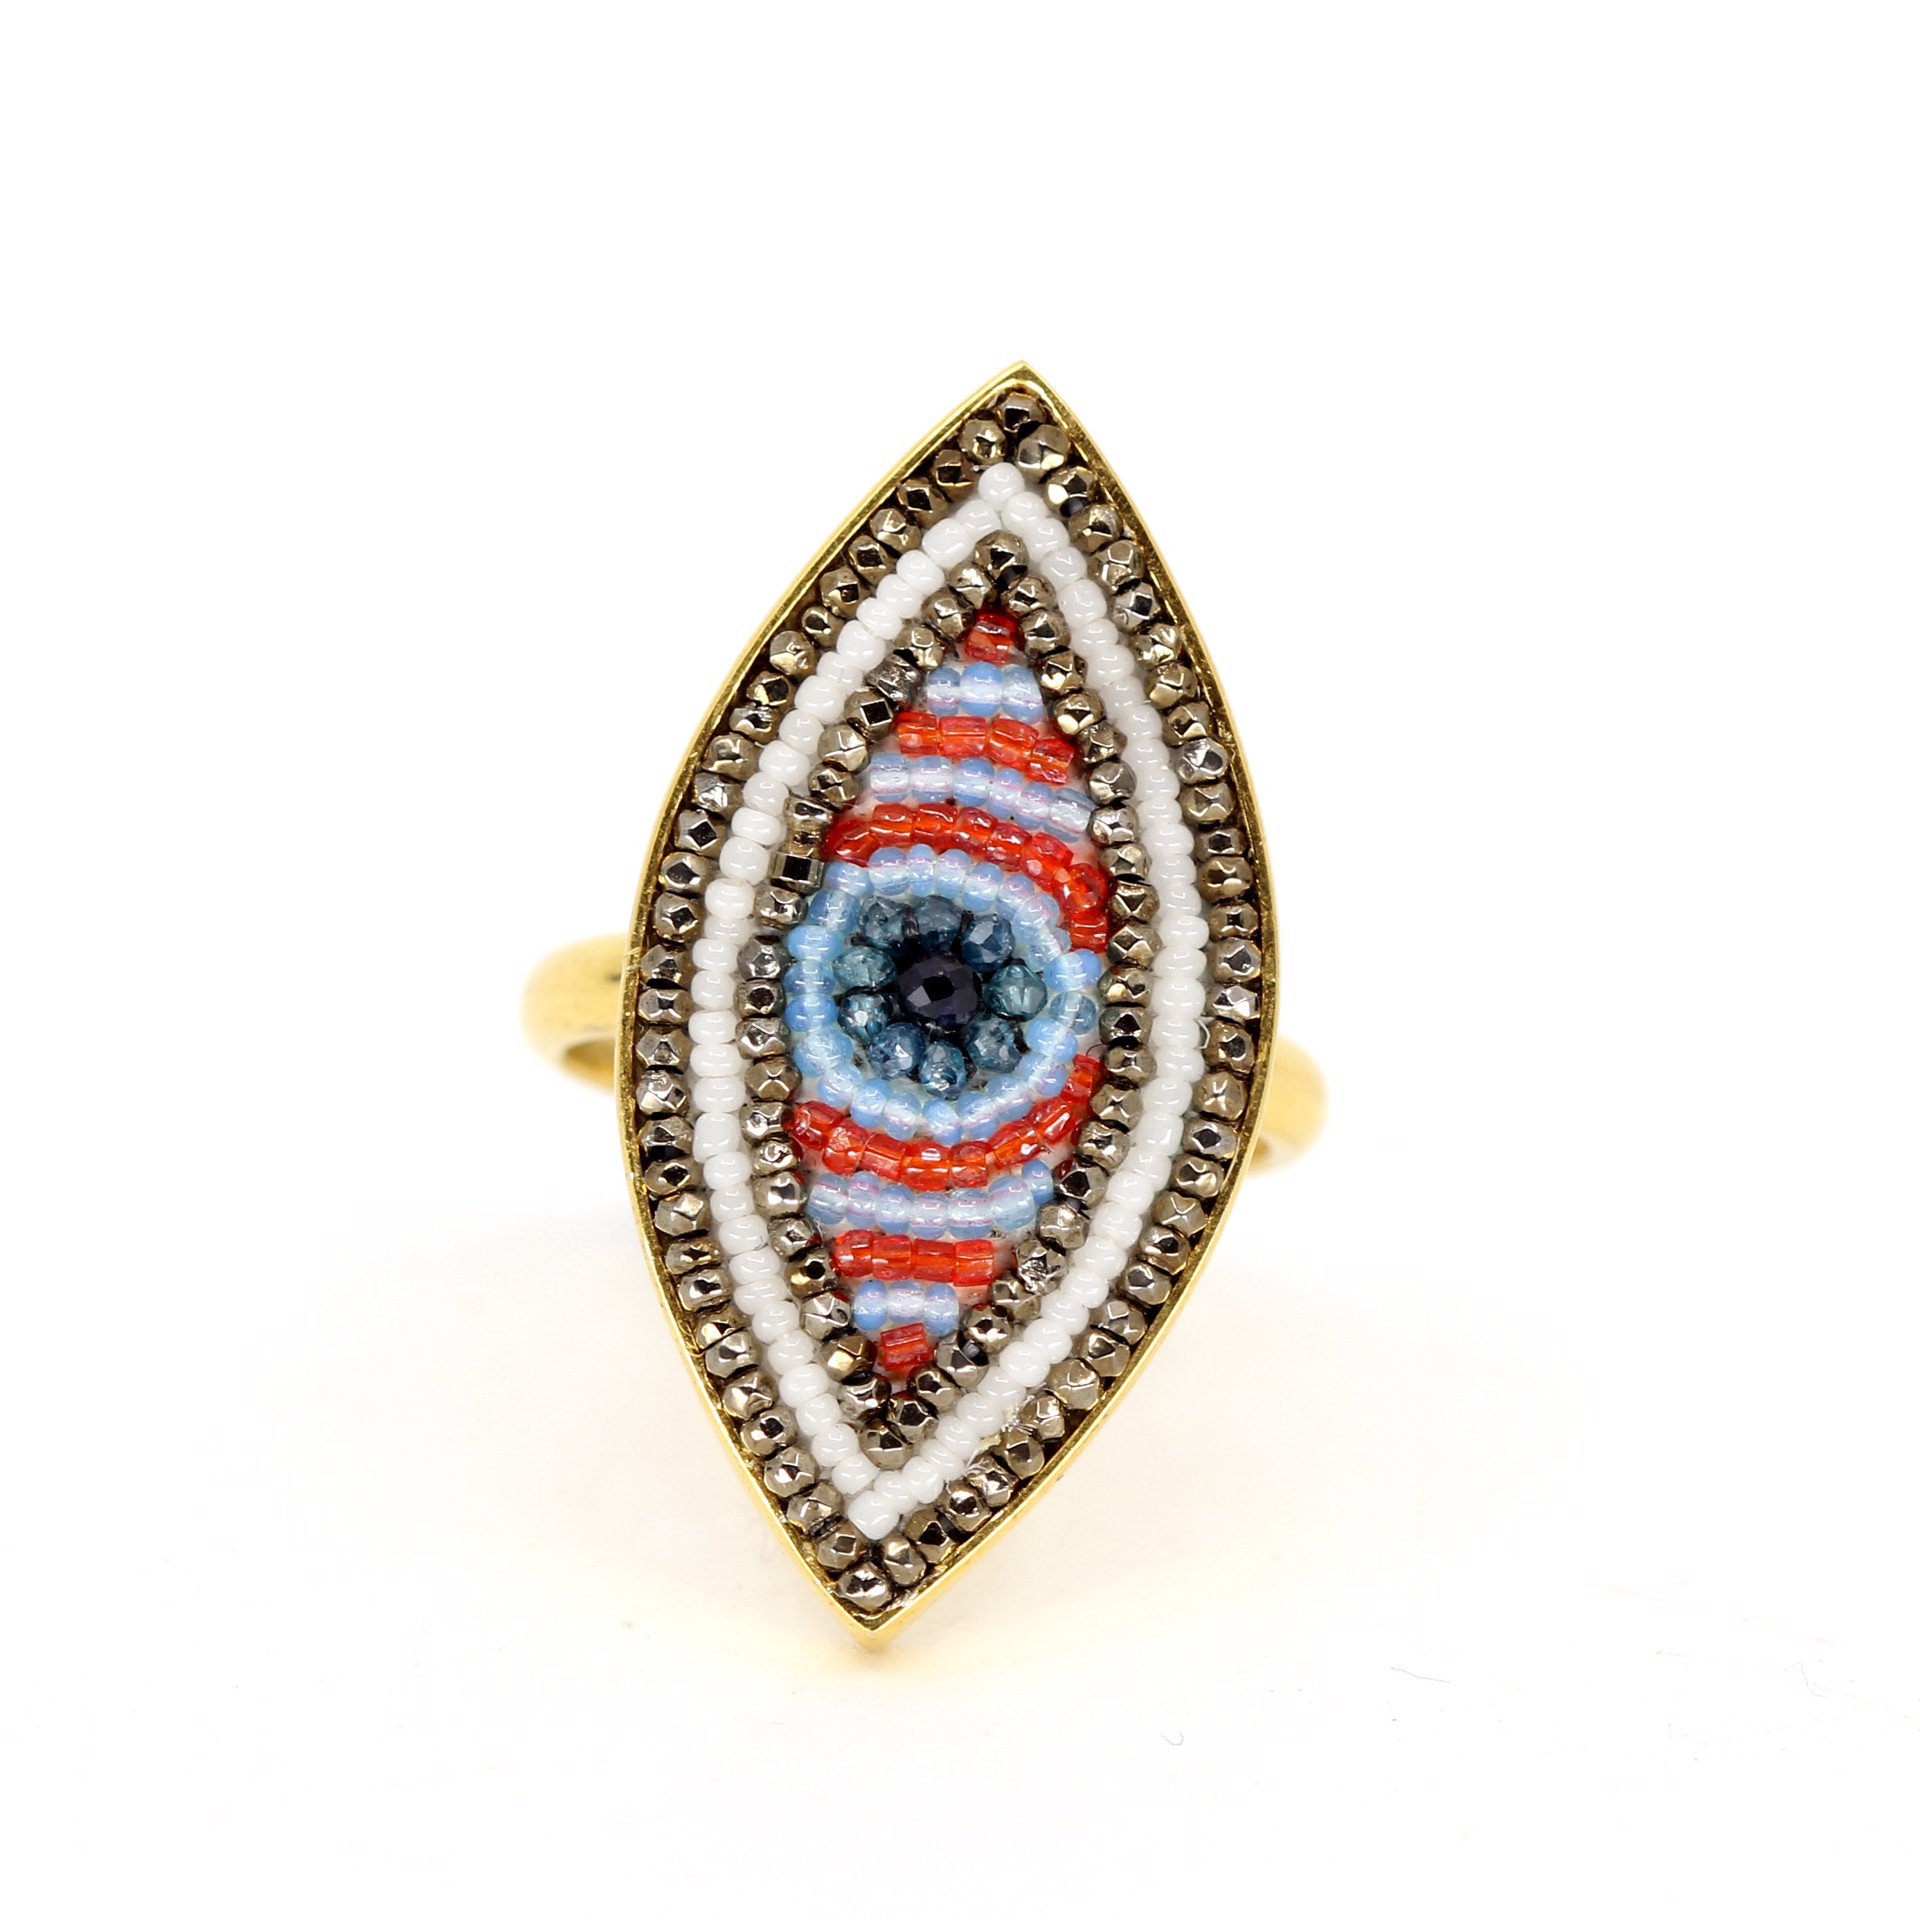 Sapphire Eye Ring by Hollis Chitto